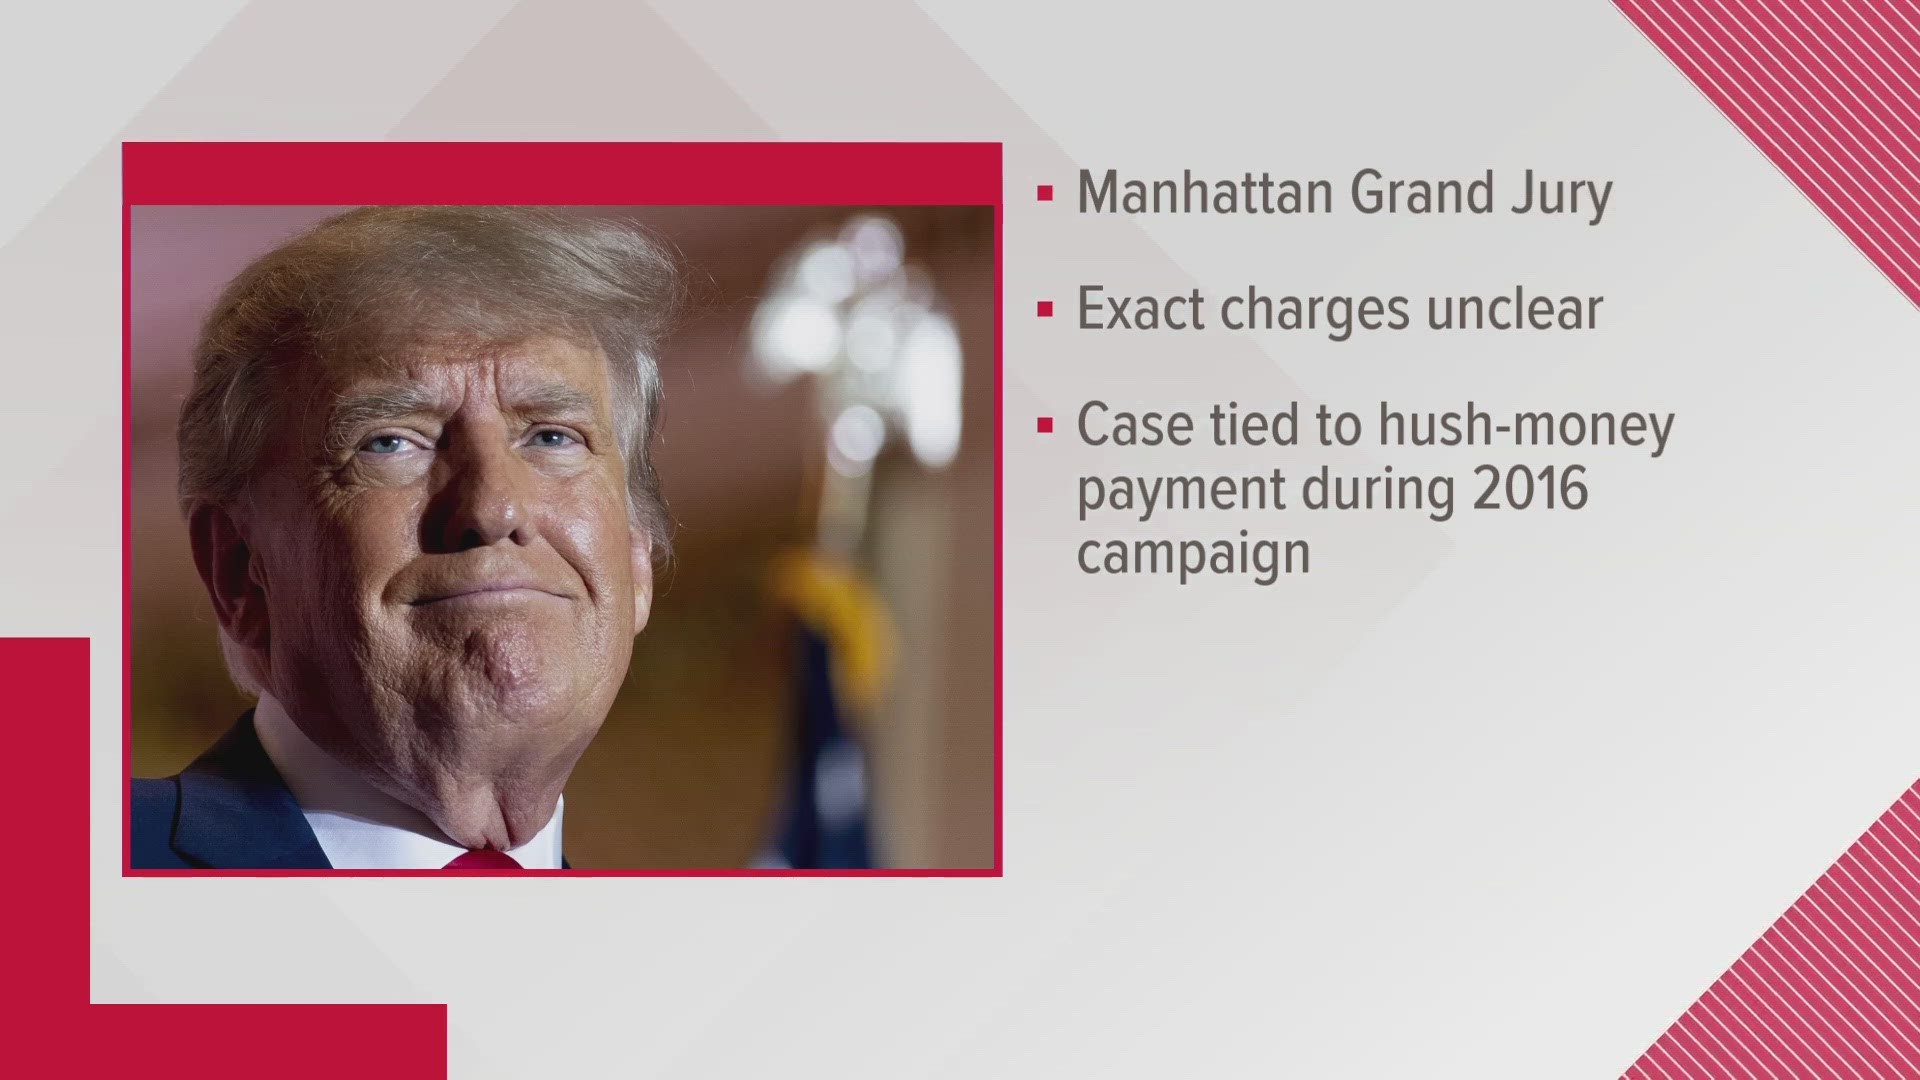 A Manhattan grand jury has voted to indict former President Donald Trump.